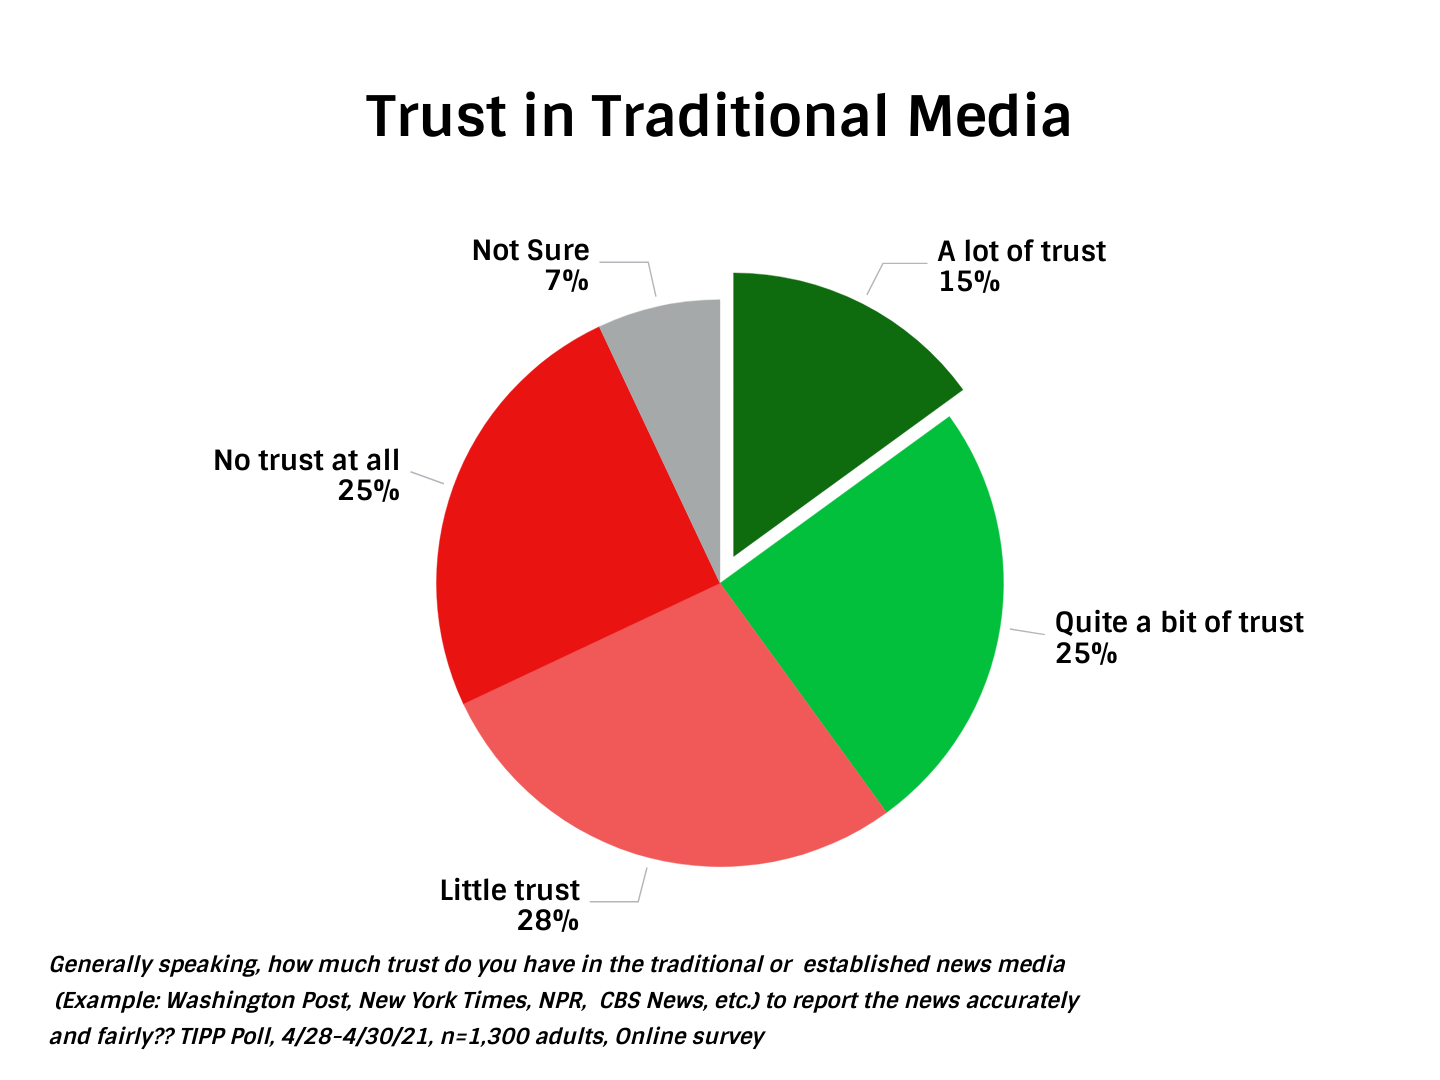 TIPP Poll Trust In Traditional Media In The United States